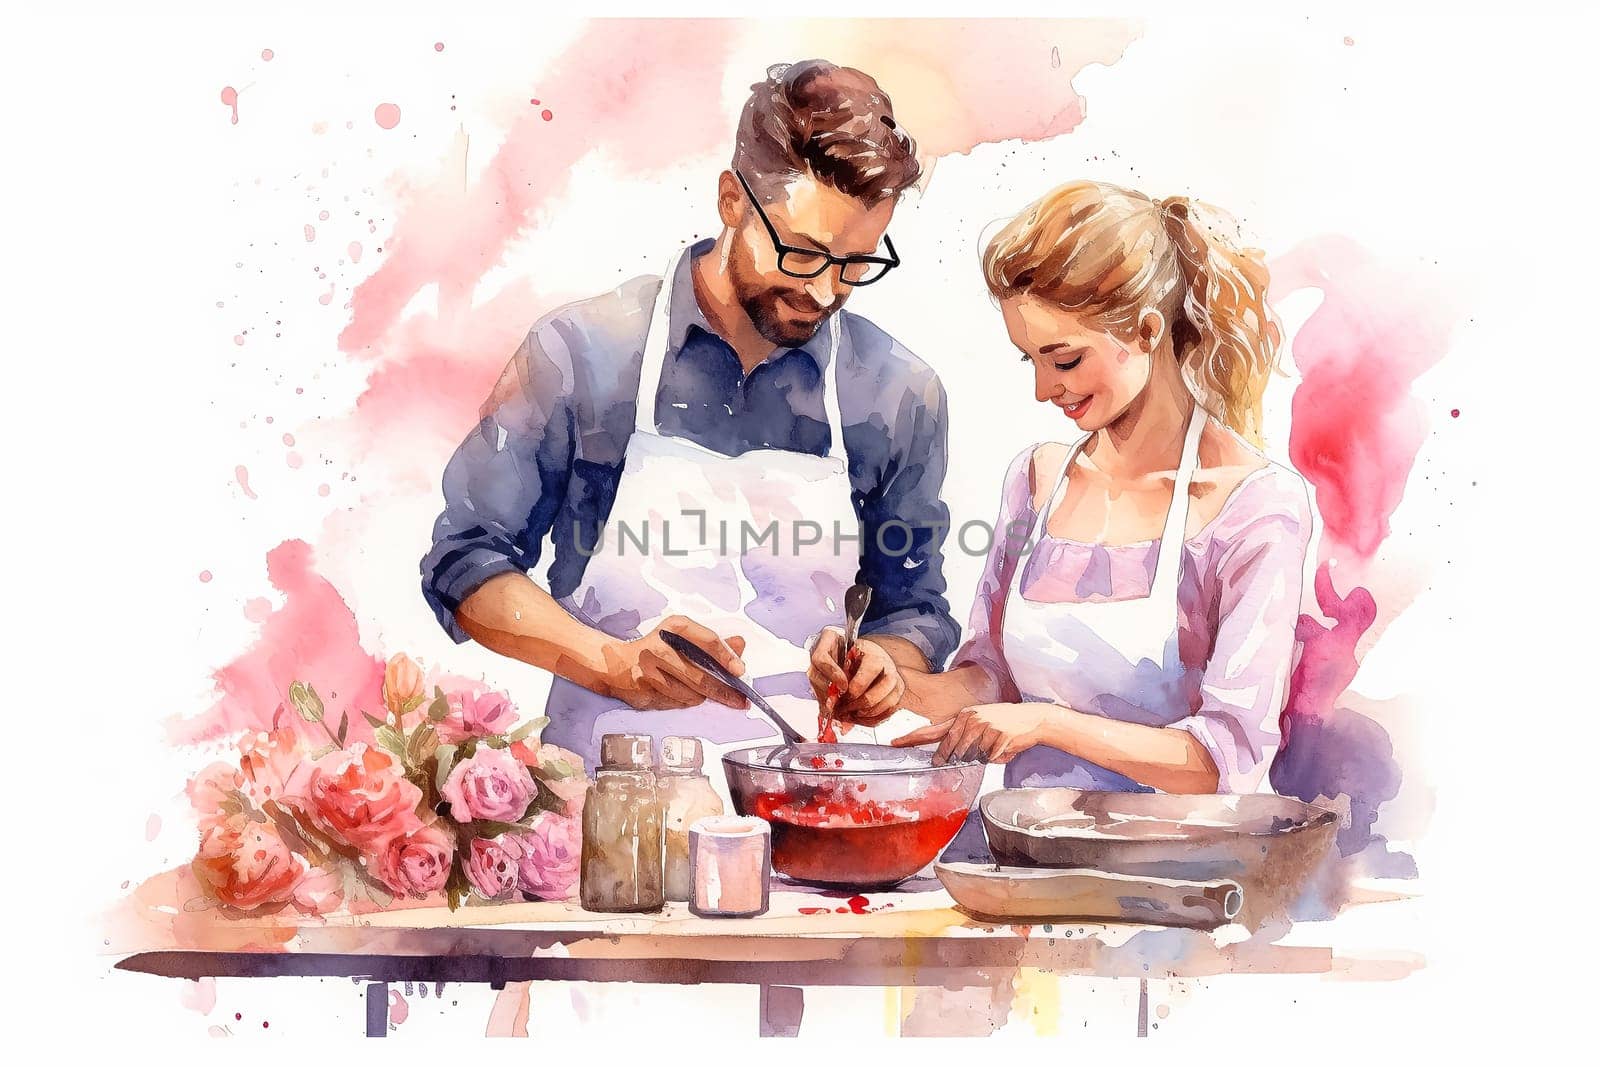 a watercolor illustration of a couple preparing food together. by Alla_Morozova93